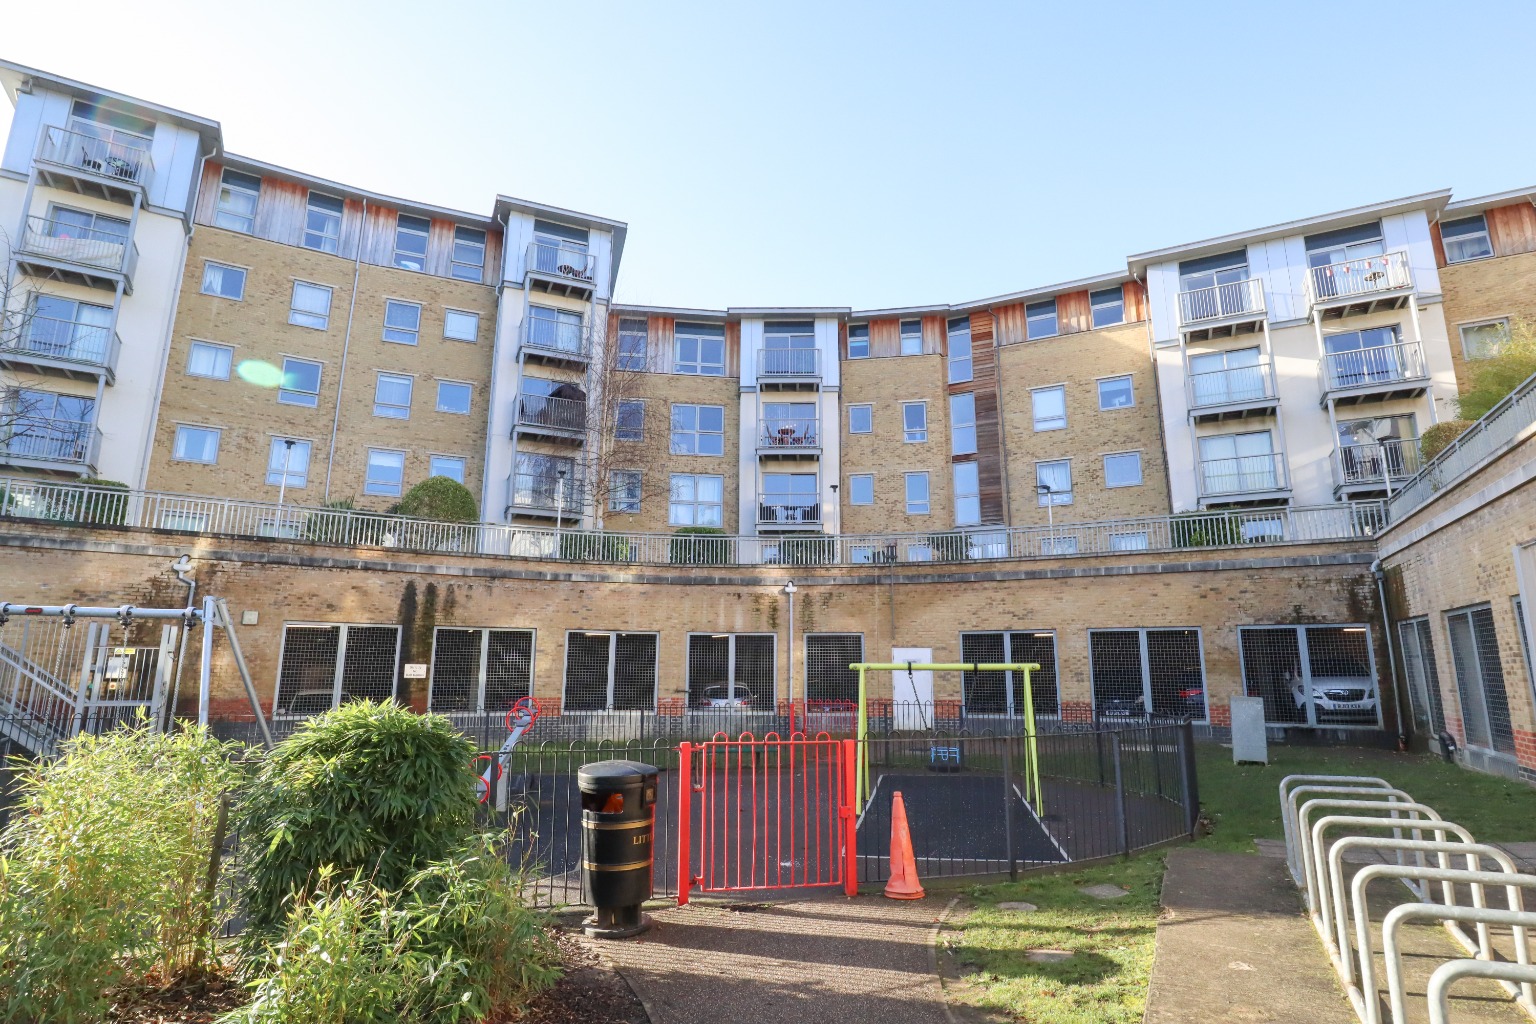 Situated in the heart of Farnborough town centre, and just a short walk from the mainline station is this fourth floor apartment, with a double bedroom, kitchen, bathroom, living room and undercroft parking.